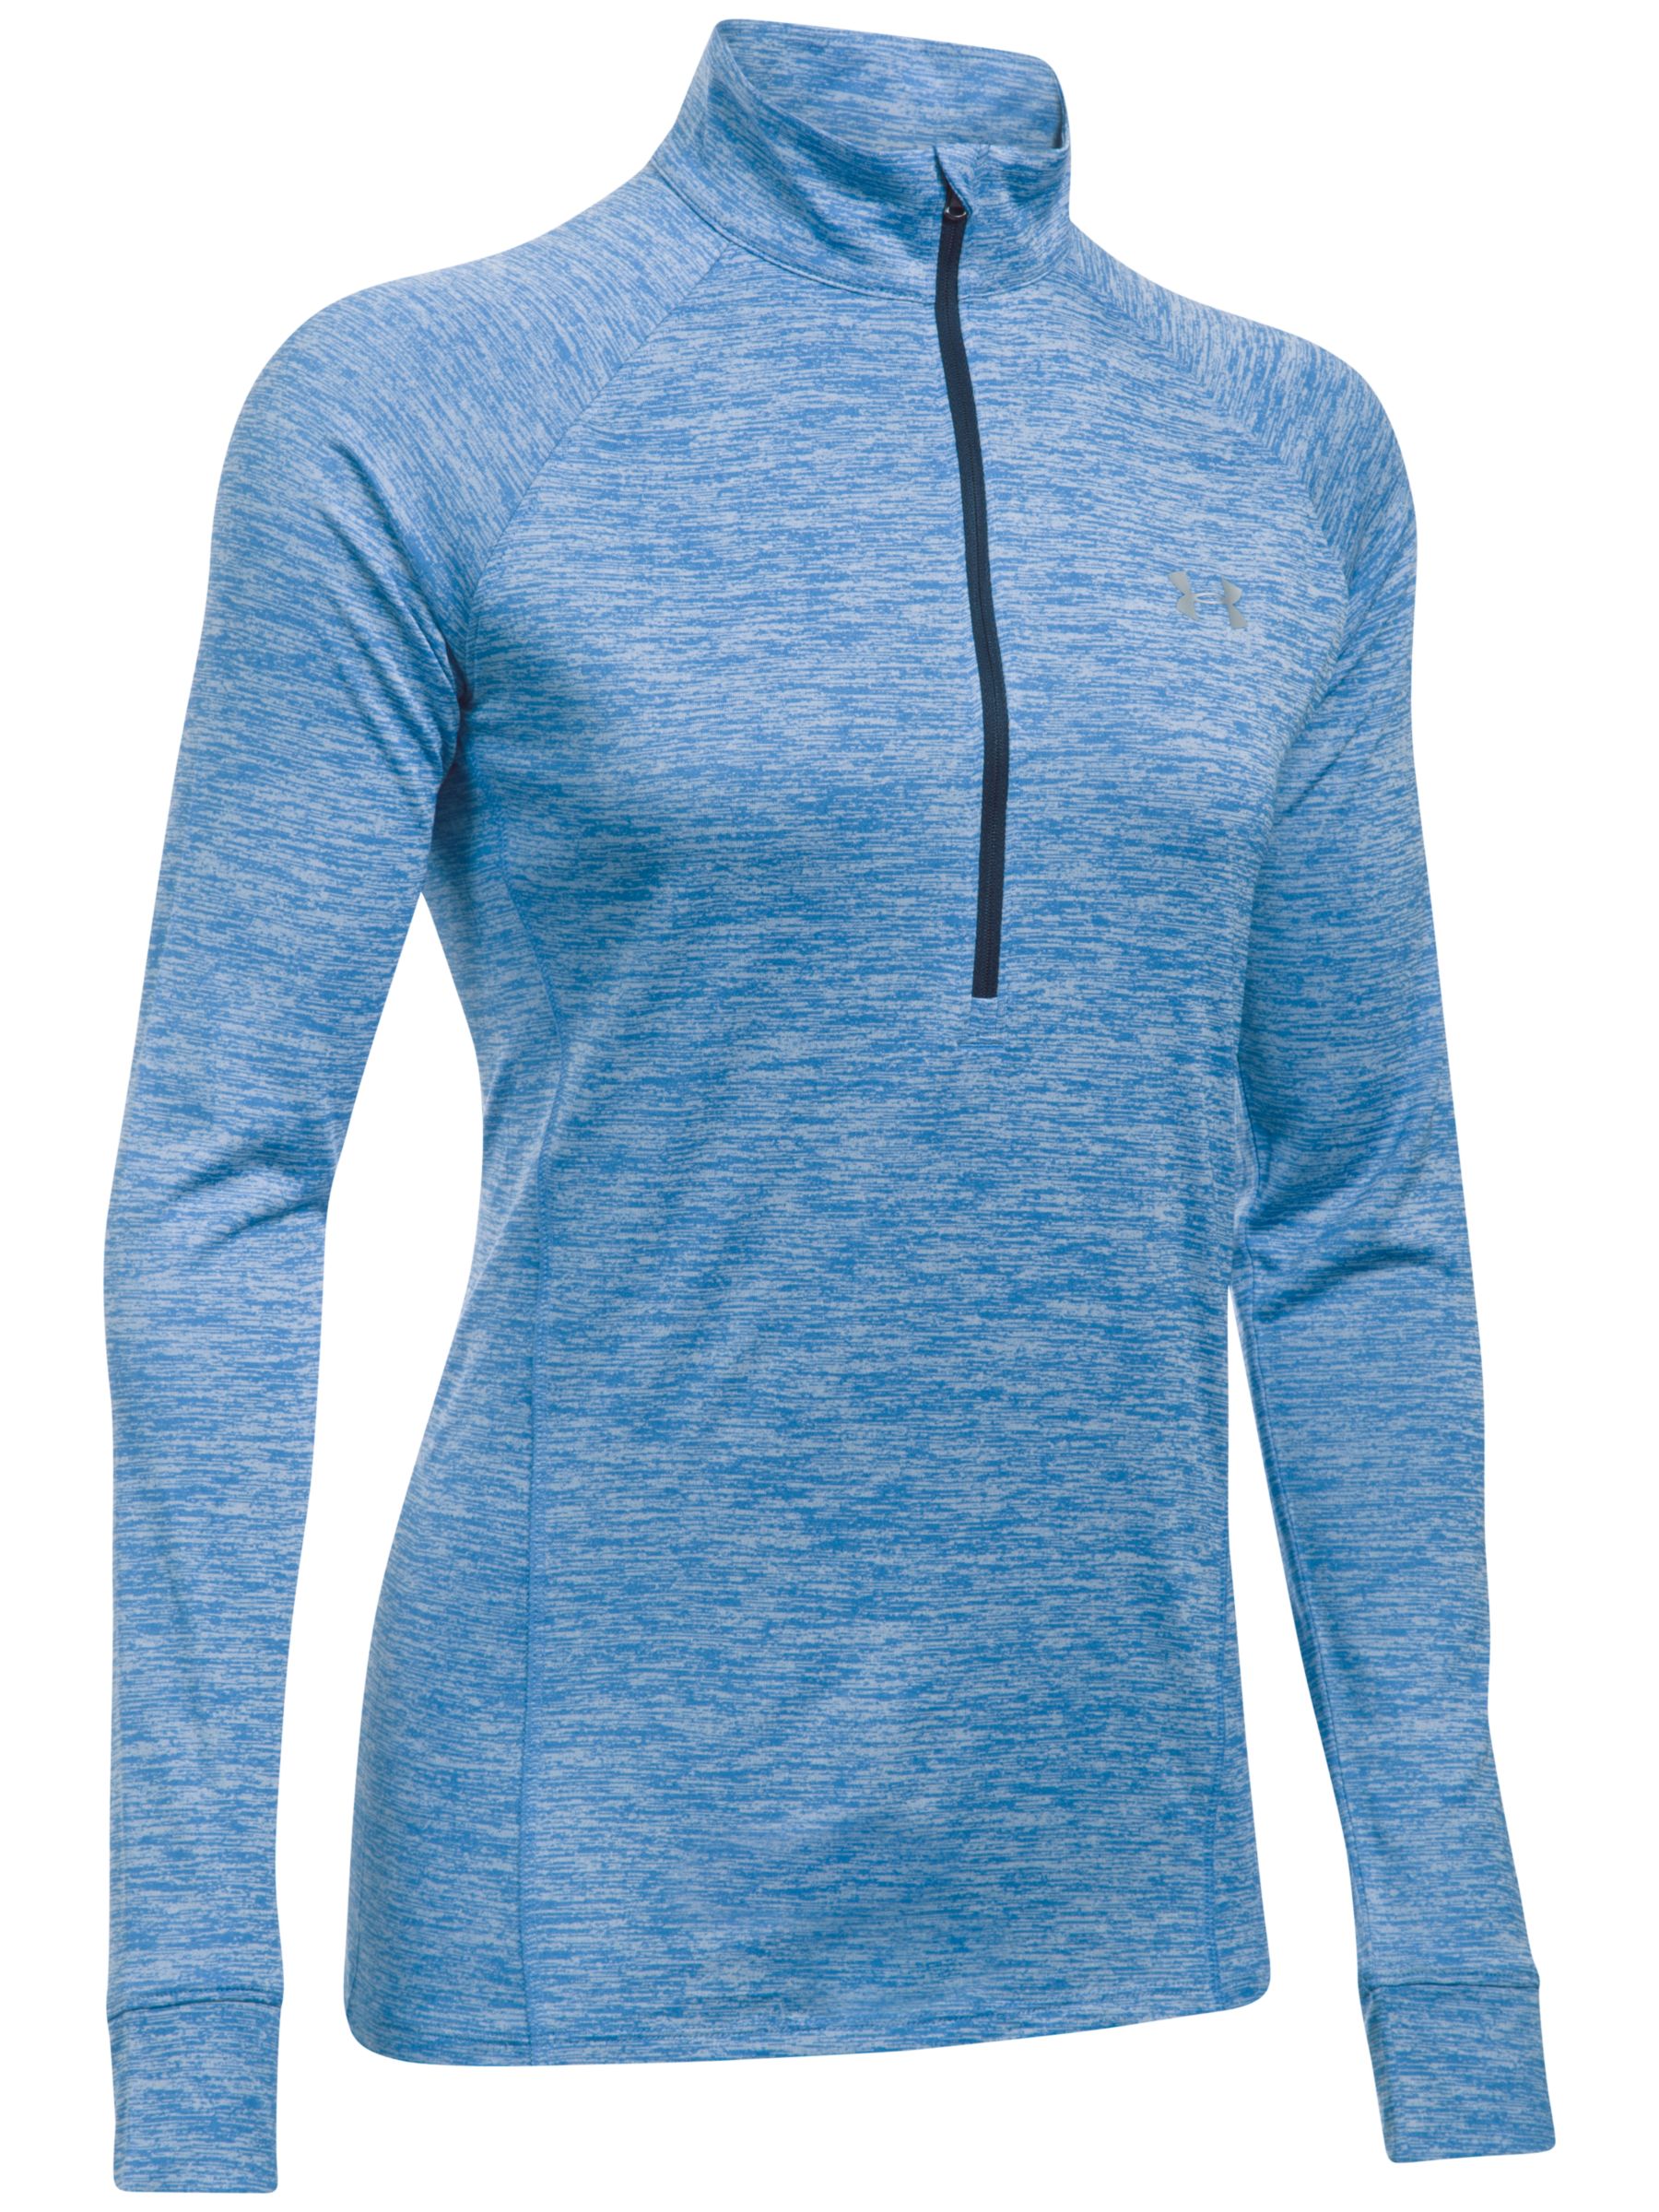 Download Under Armour Tech 1/2 Zip Twist Long Sleeve Top, Blue at ...